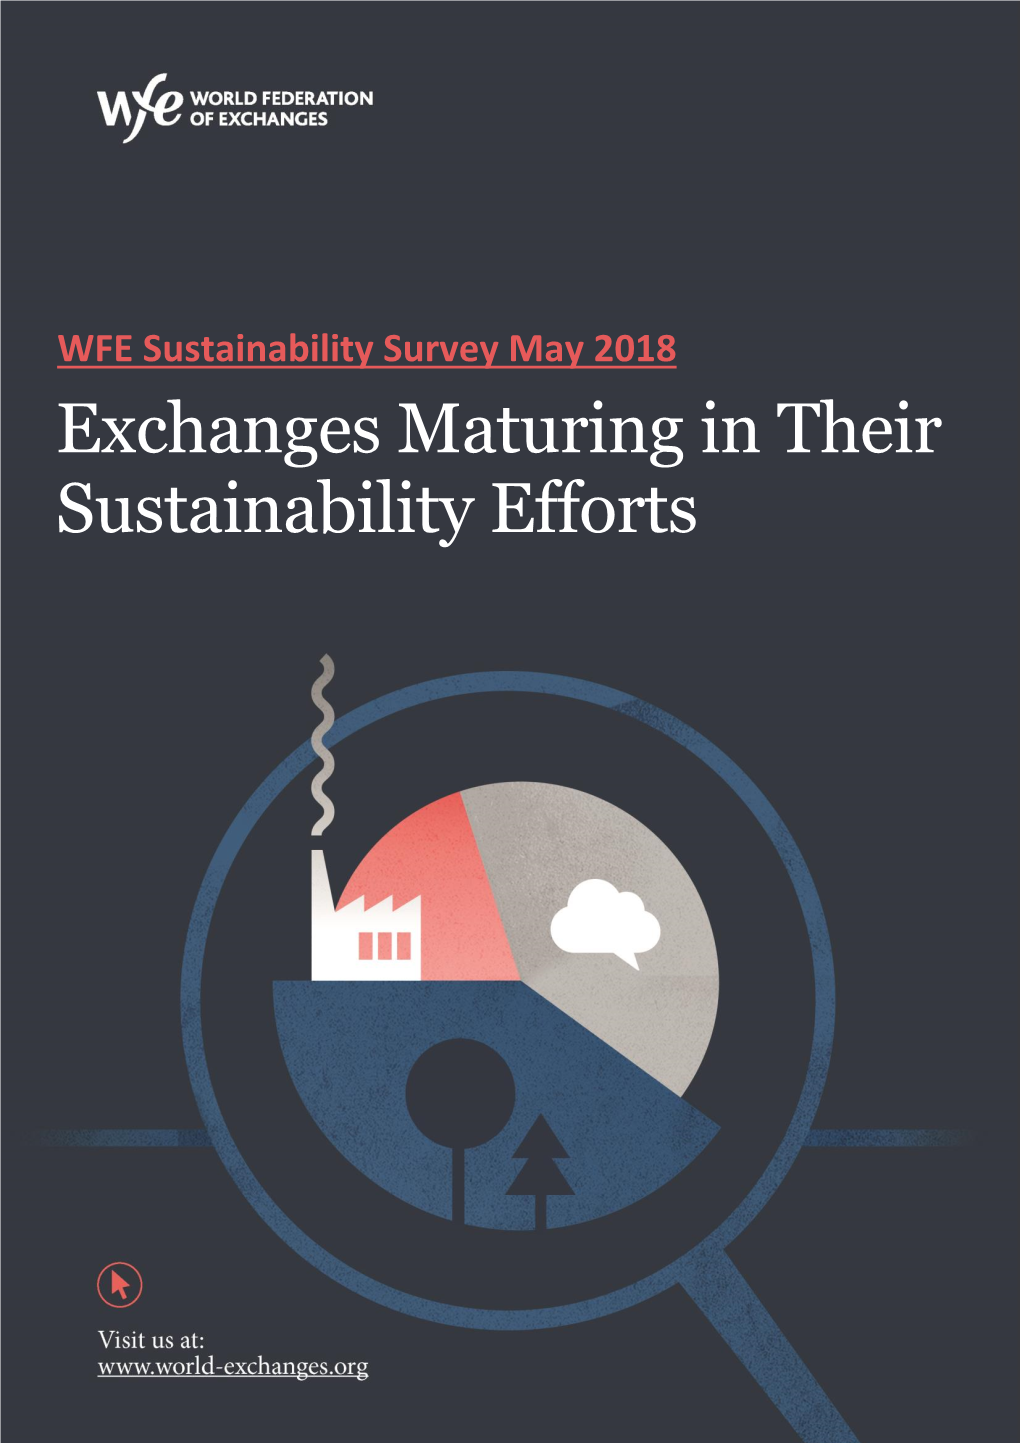 Exchanges Maturing in Their Sustainability Efforts